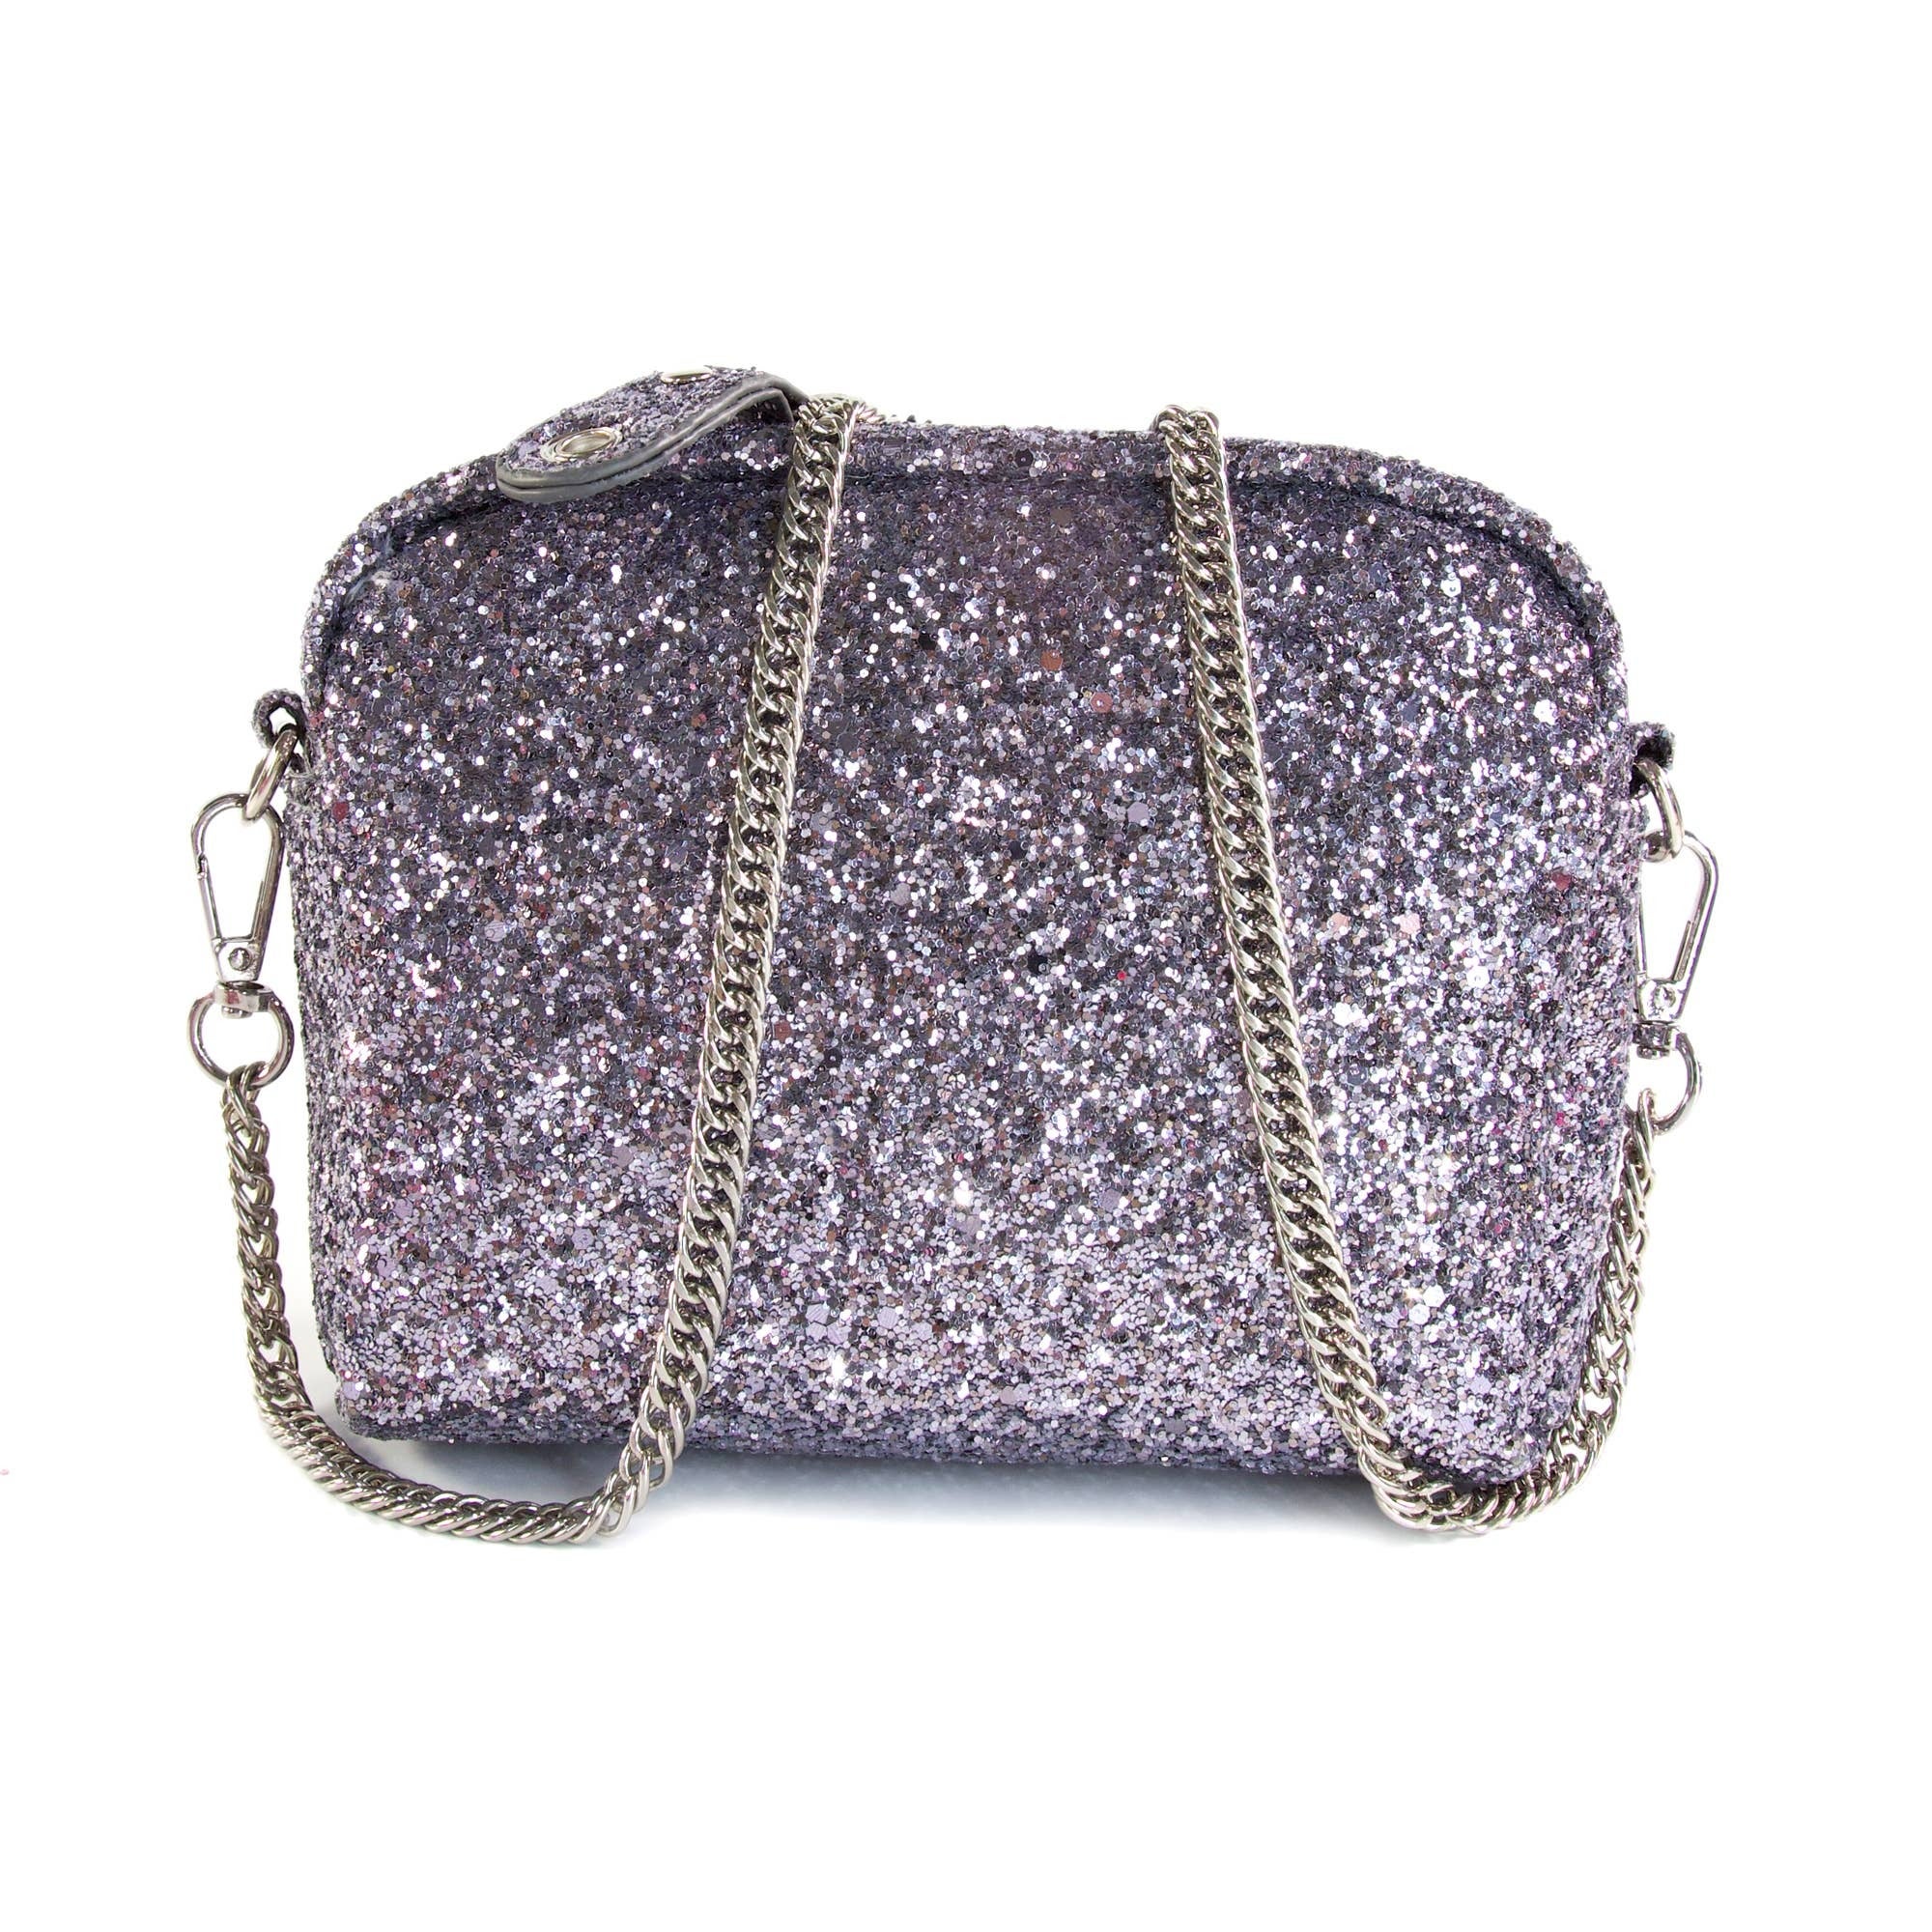 Amazon.com | Slant Collections Glittery Clutch Purse with Hidden Flask,  Holds 16-Ounces, Silver: Flasks